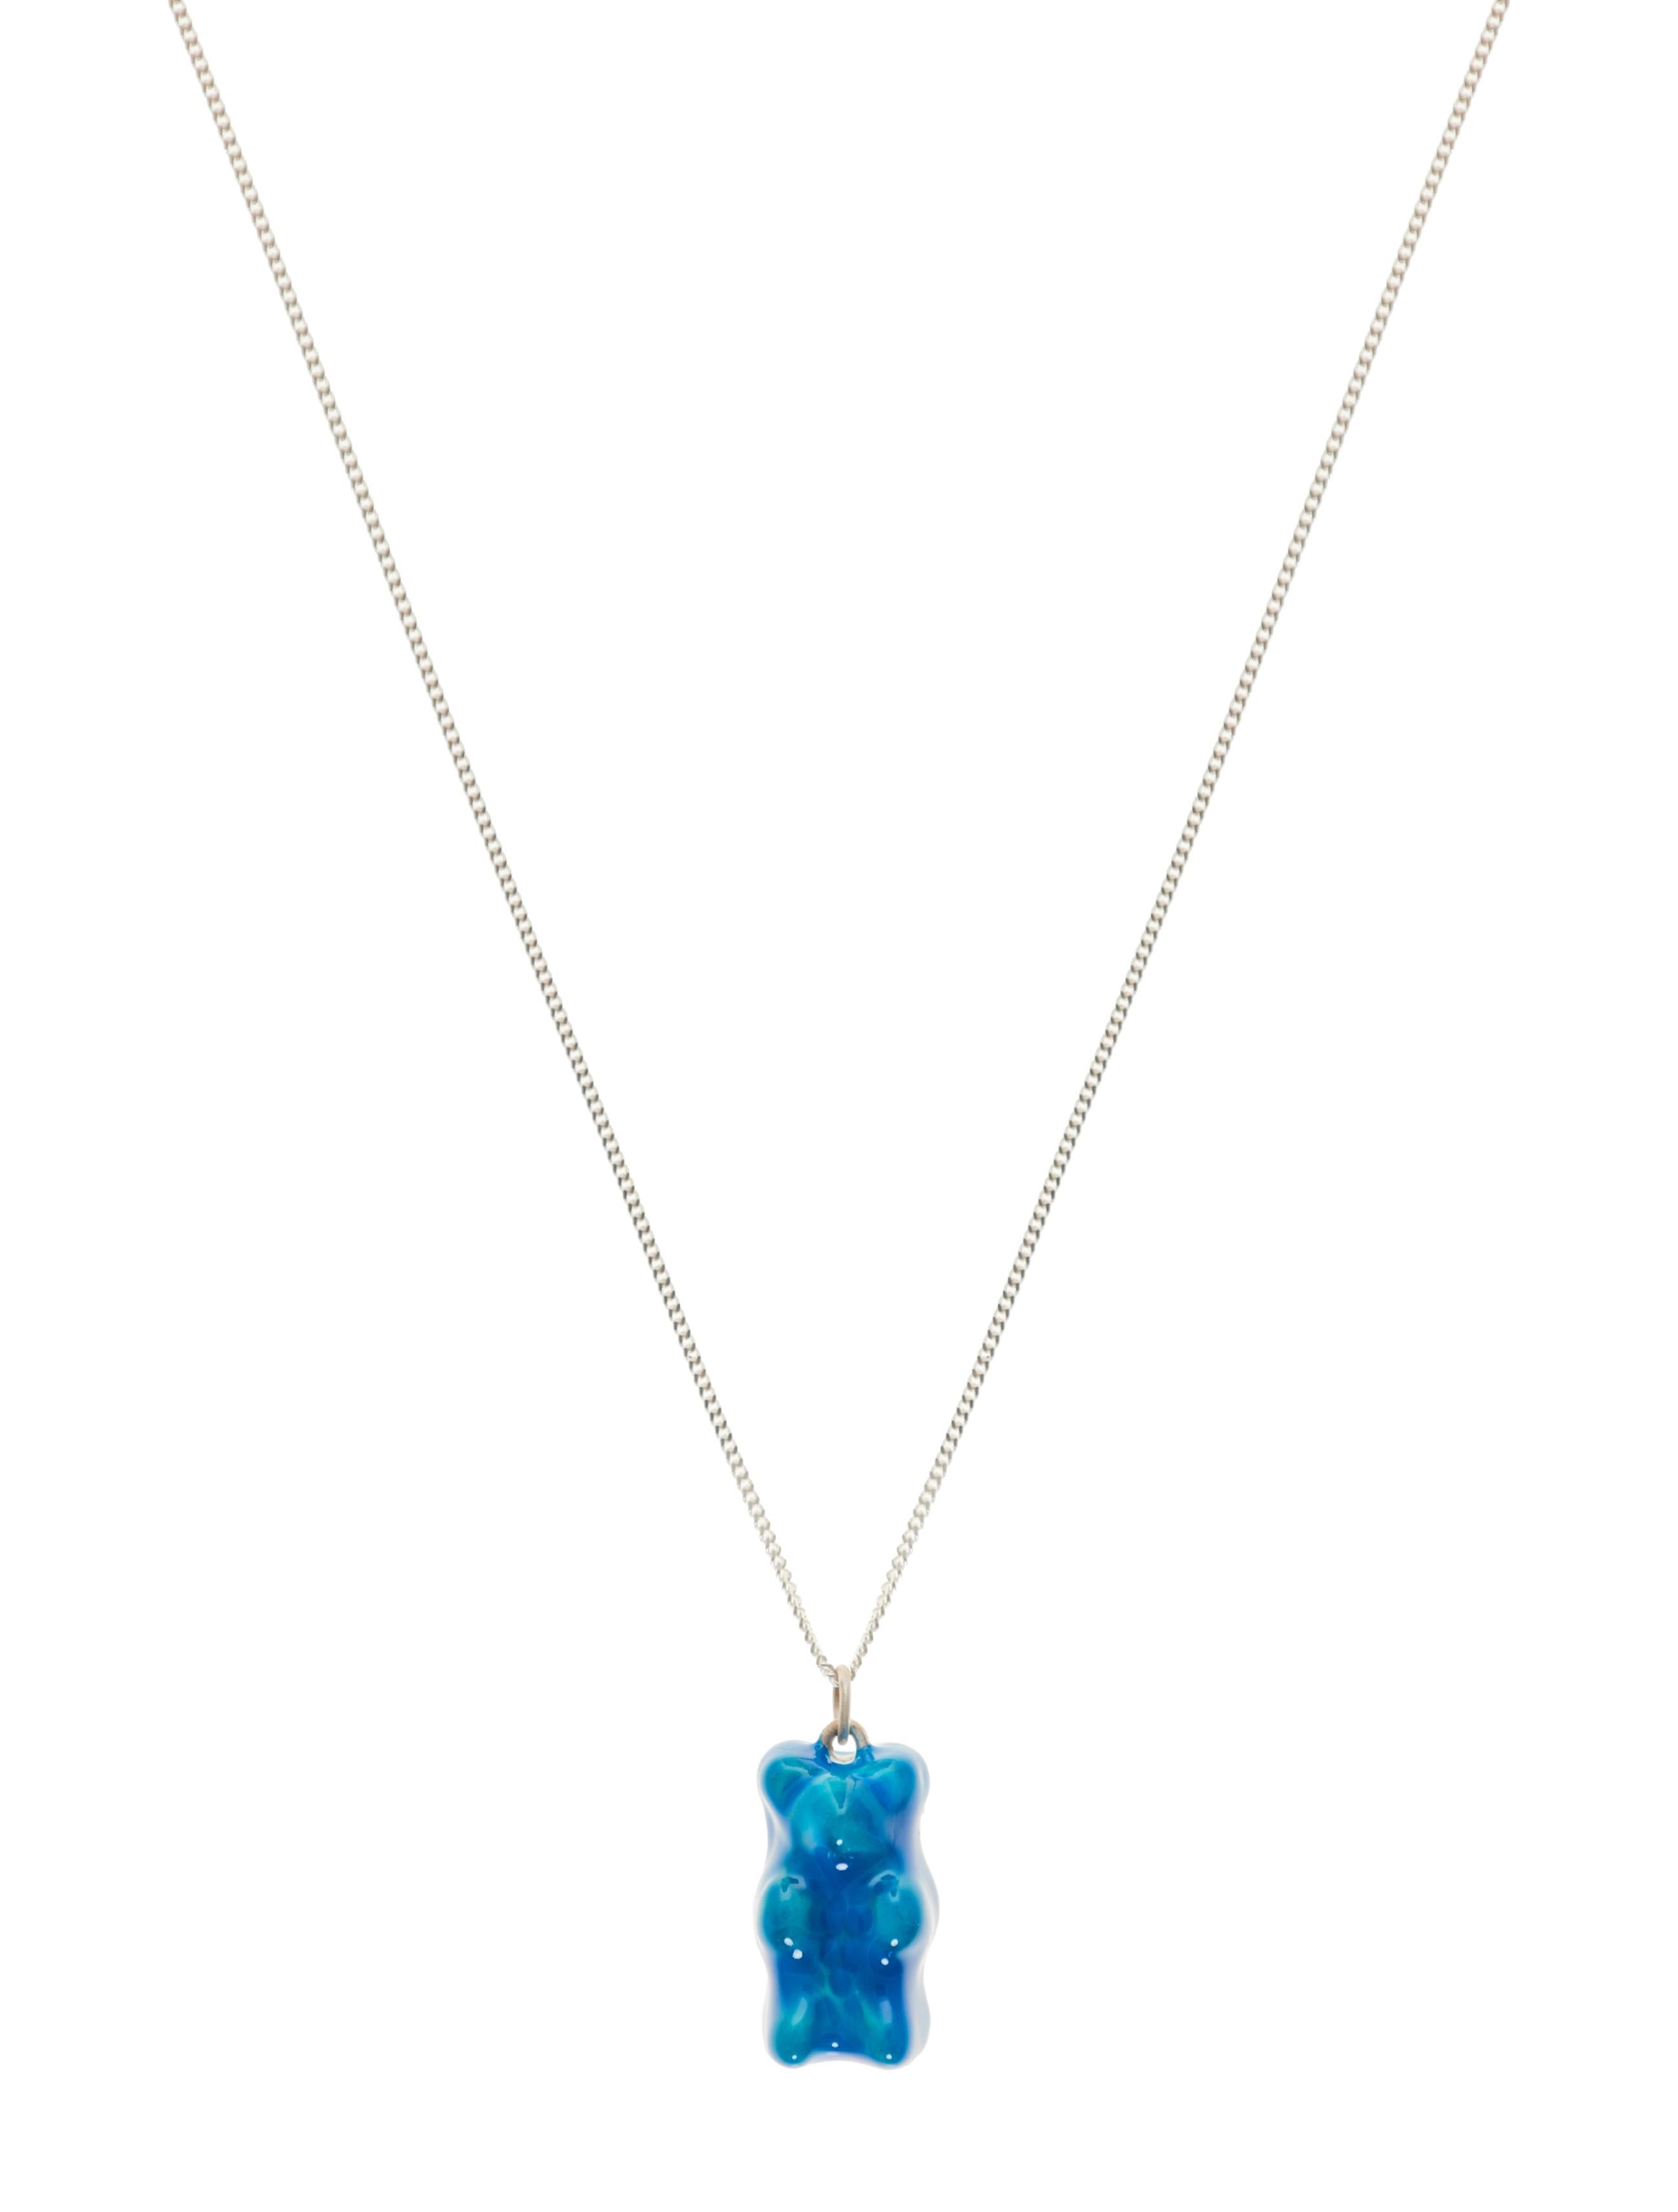 the blue neon gummy bear 

925 Sterling silver gummy bear pendant on silver gourmet chain.

The Gummy Project by Maggoosh is a capsule collection inspired by the designer's life in New York City and her passion for breakdancing and other street